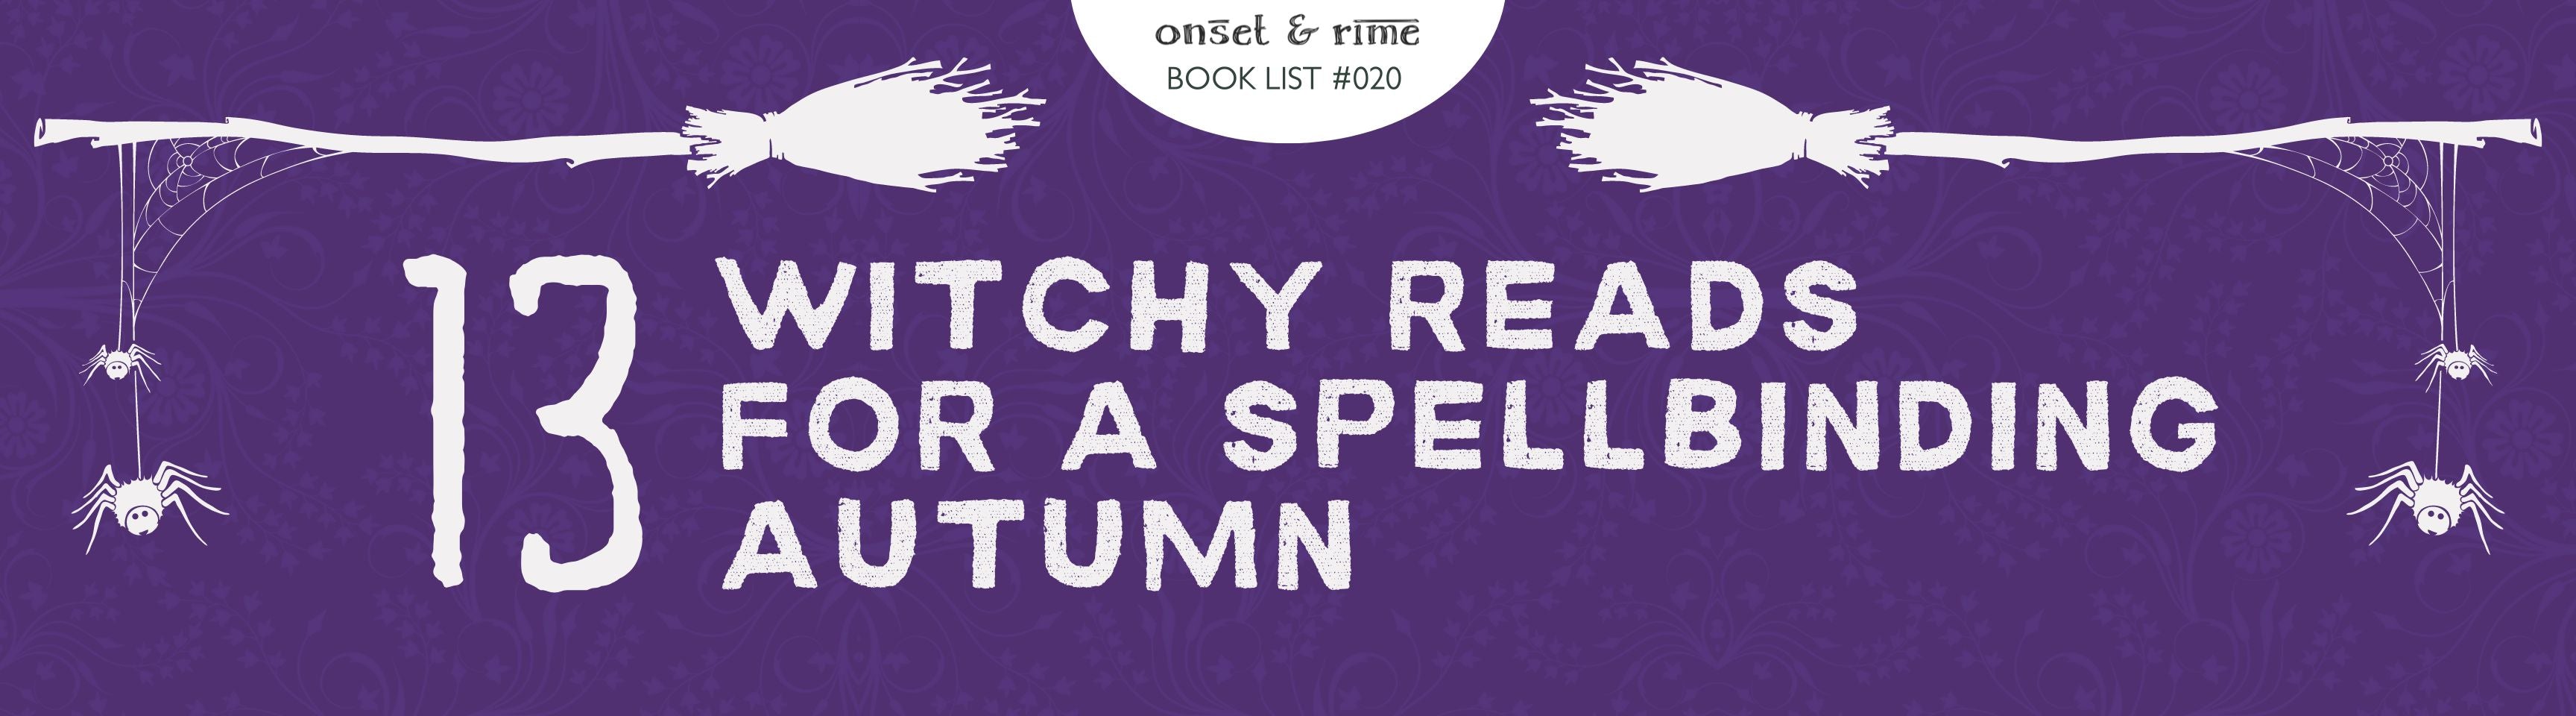 13 Witchy Reads for a Spellbinding Autumn